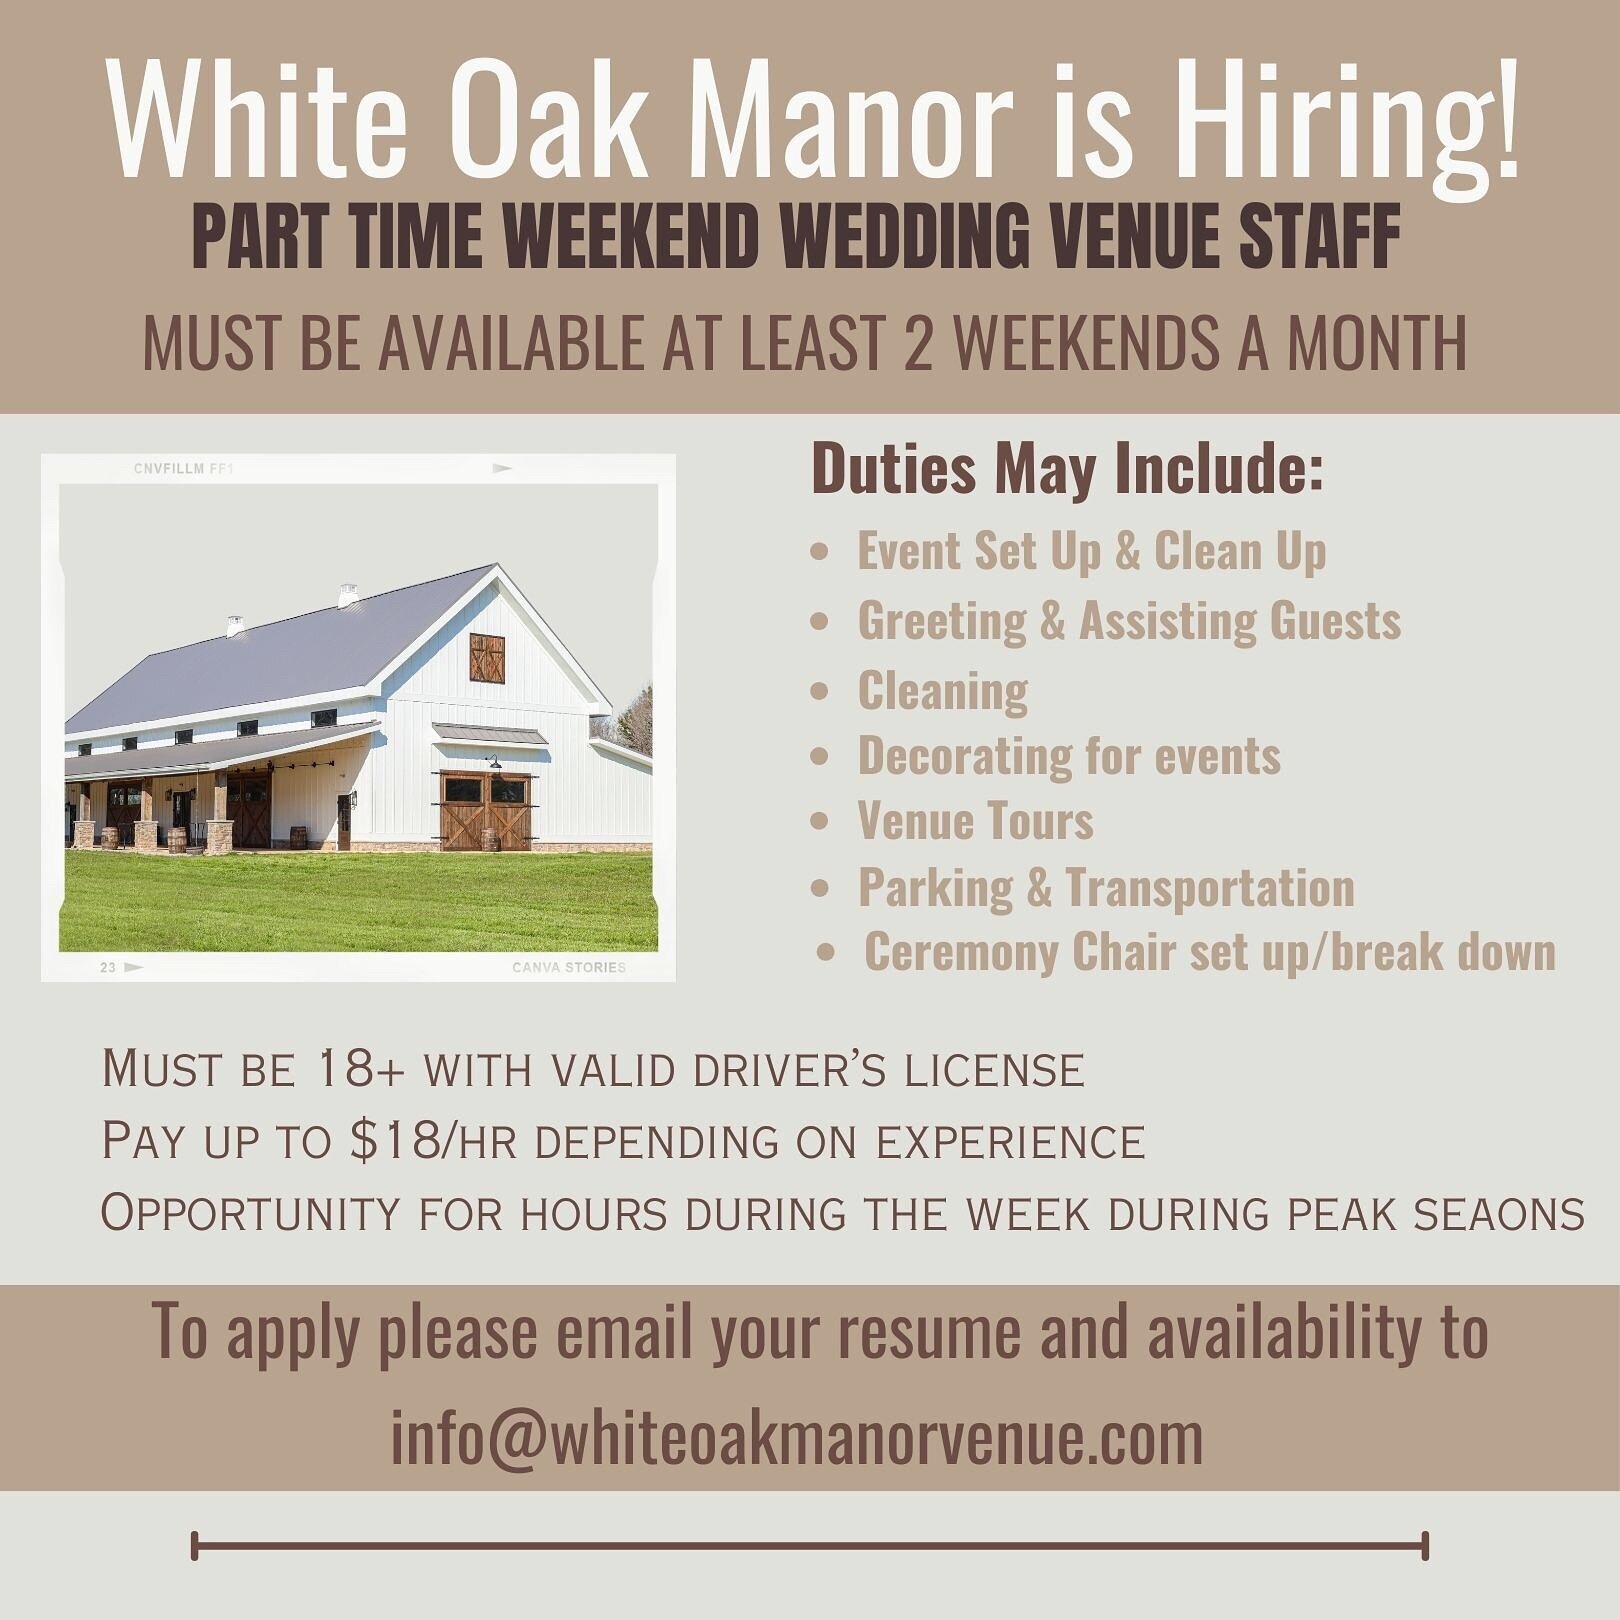 We are hiring part time weekend venue staff! Come Join the White Oak Manor Team! 

&bull;Must be available at least 2 weekends a month
&bull;pay up to $18/hr depending on experience
&bull;must be 18 or older with valid driver&rsquo;s license

Send Re